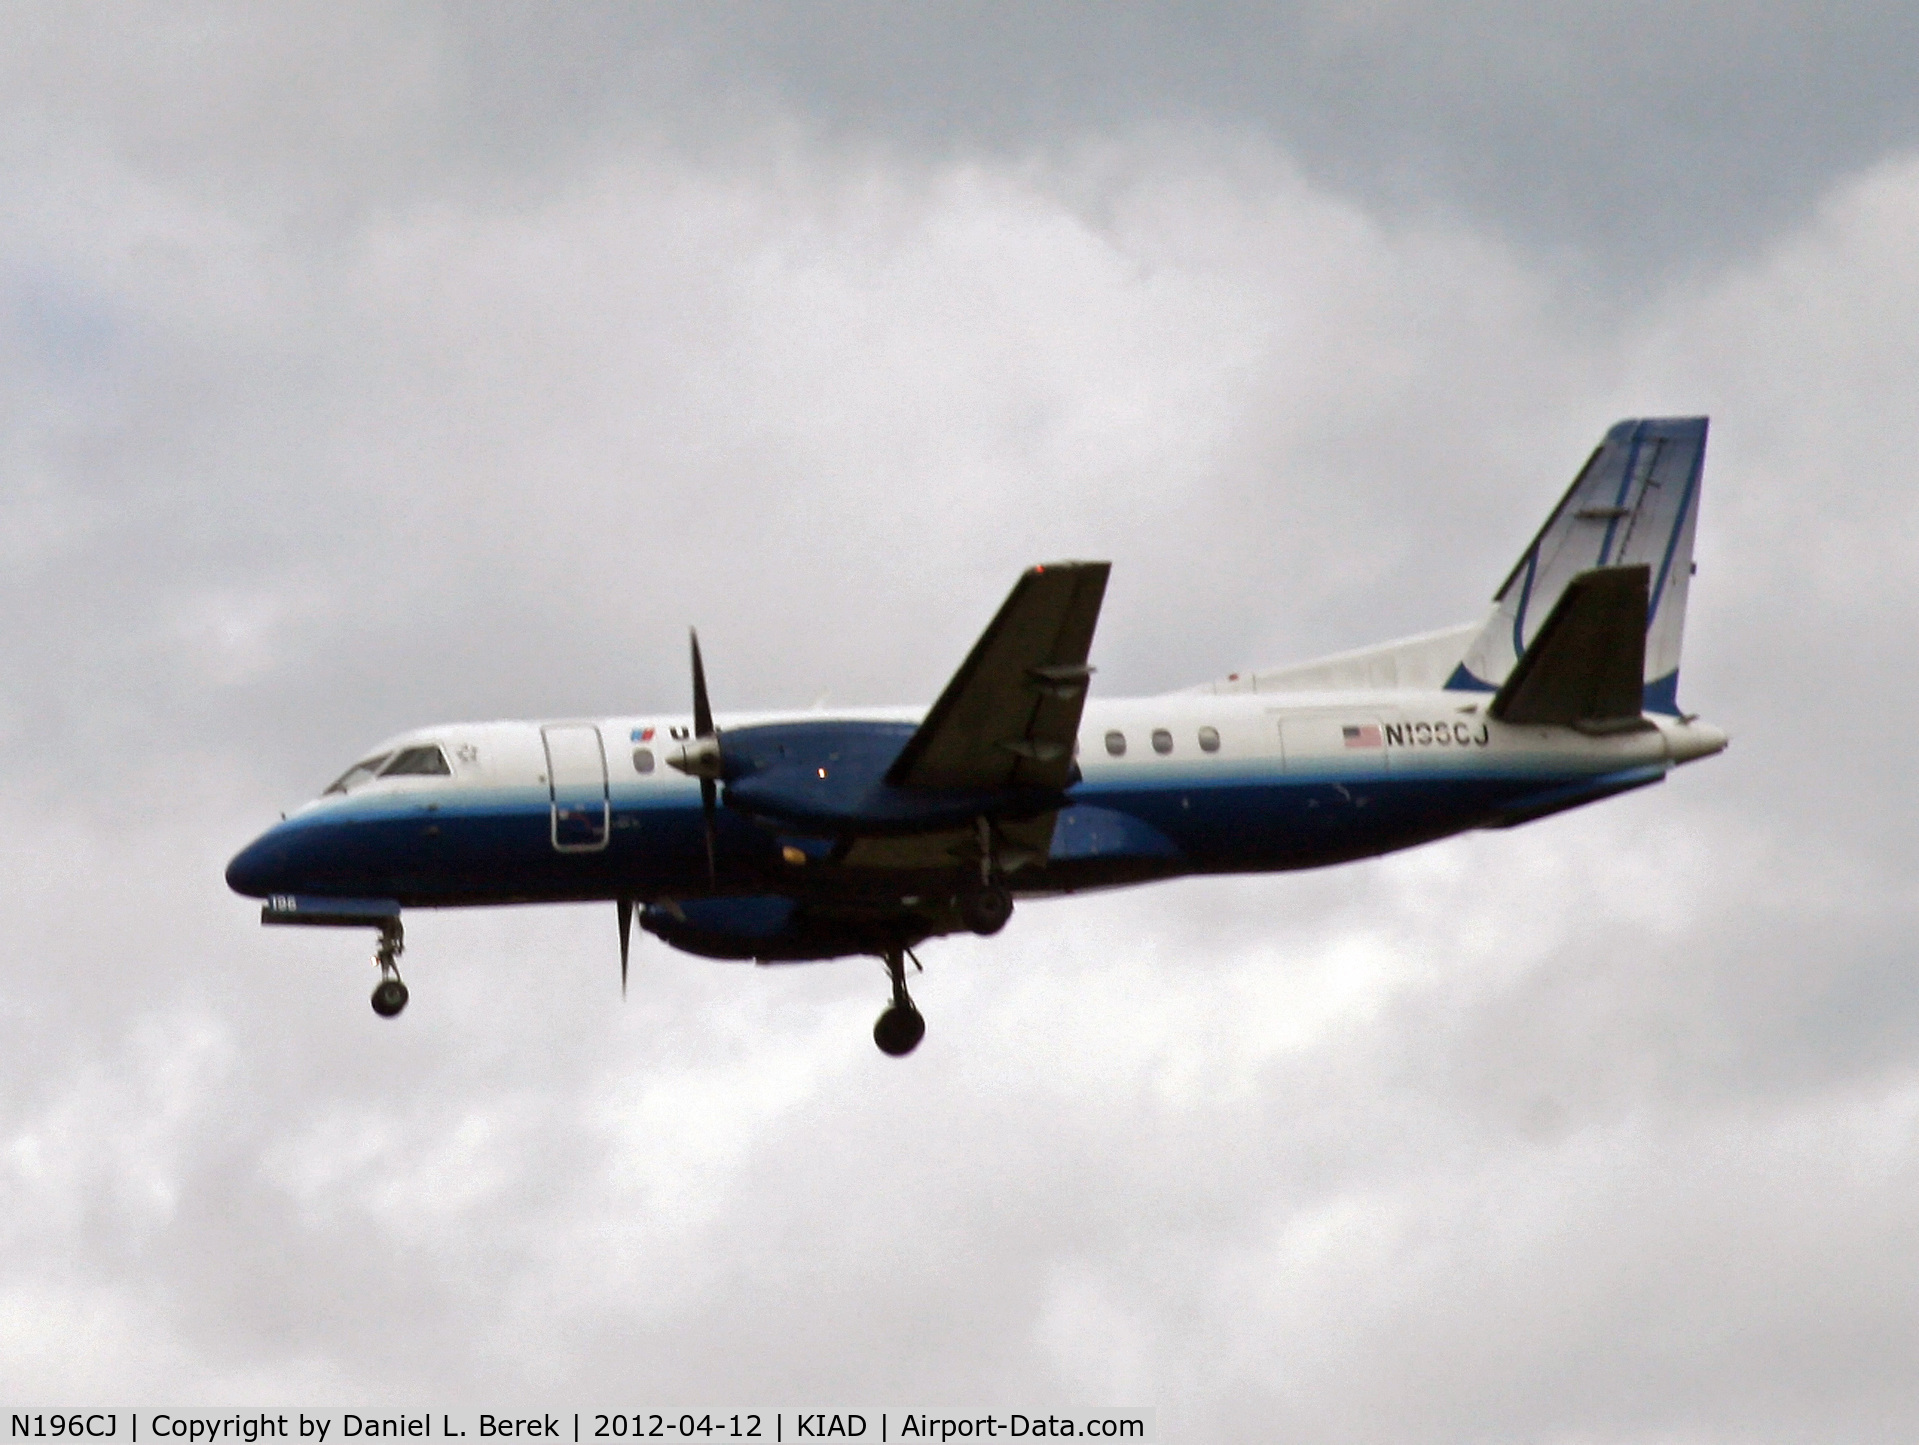 N196CJ, 1990 Saab 340B C/N 340B-196, A frequent visitor to IAD comes in at the short runway.